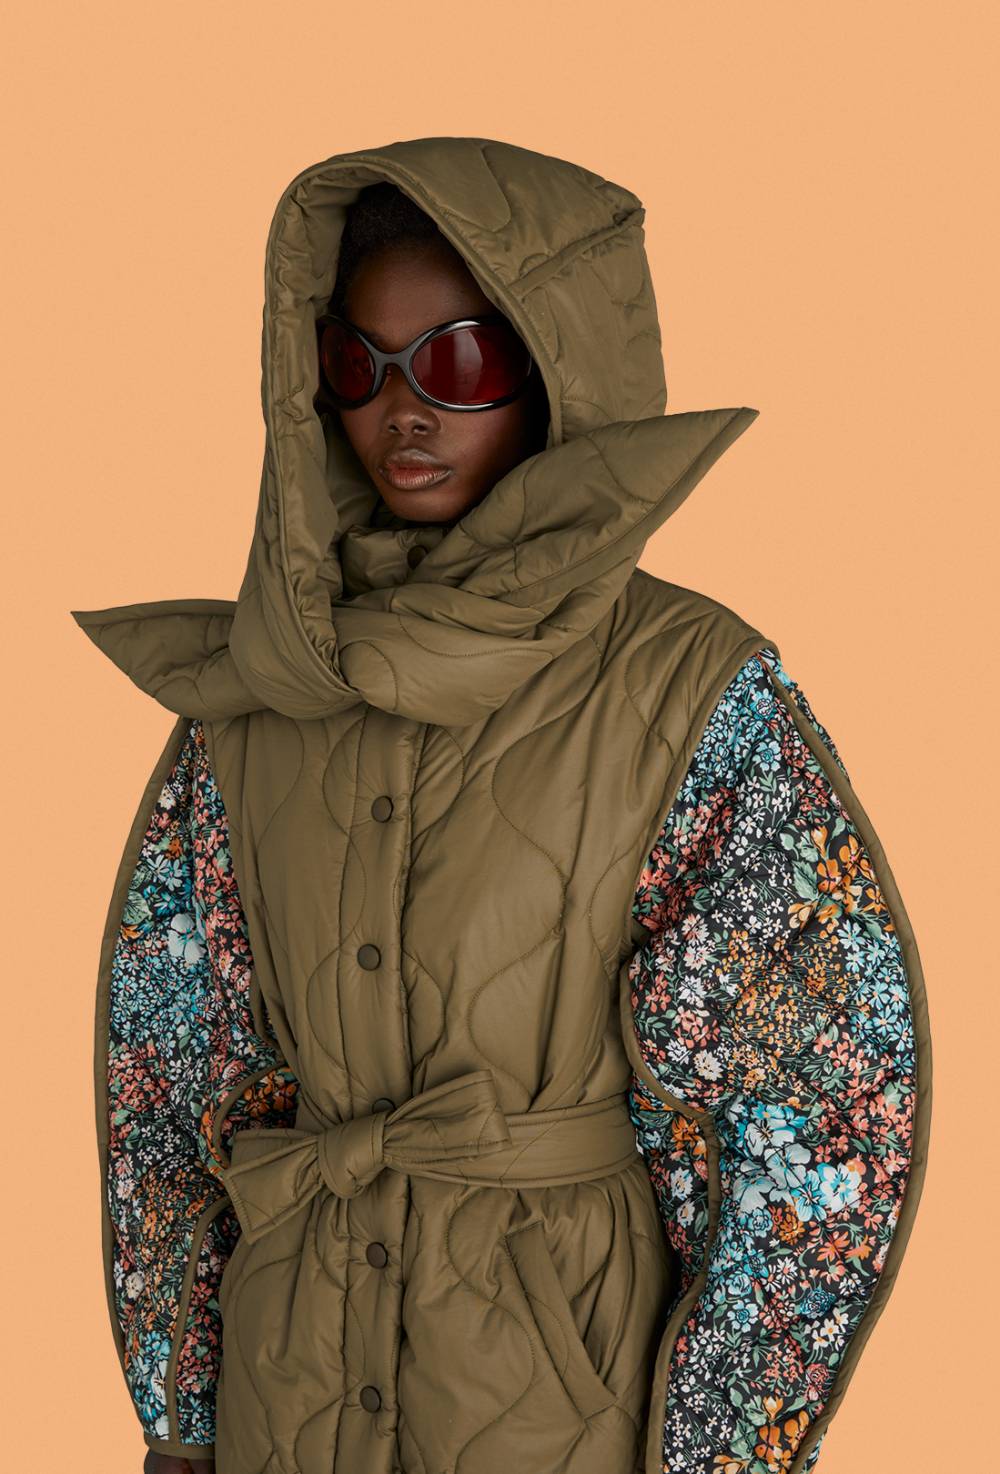 Cervinia print quilted coat by Sea image #3